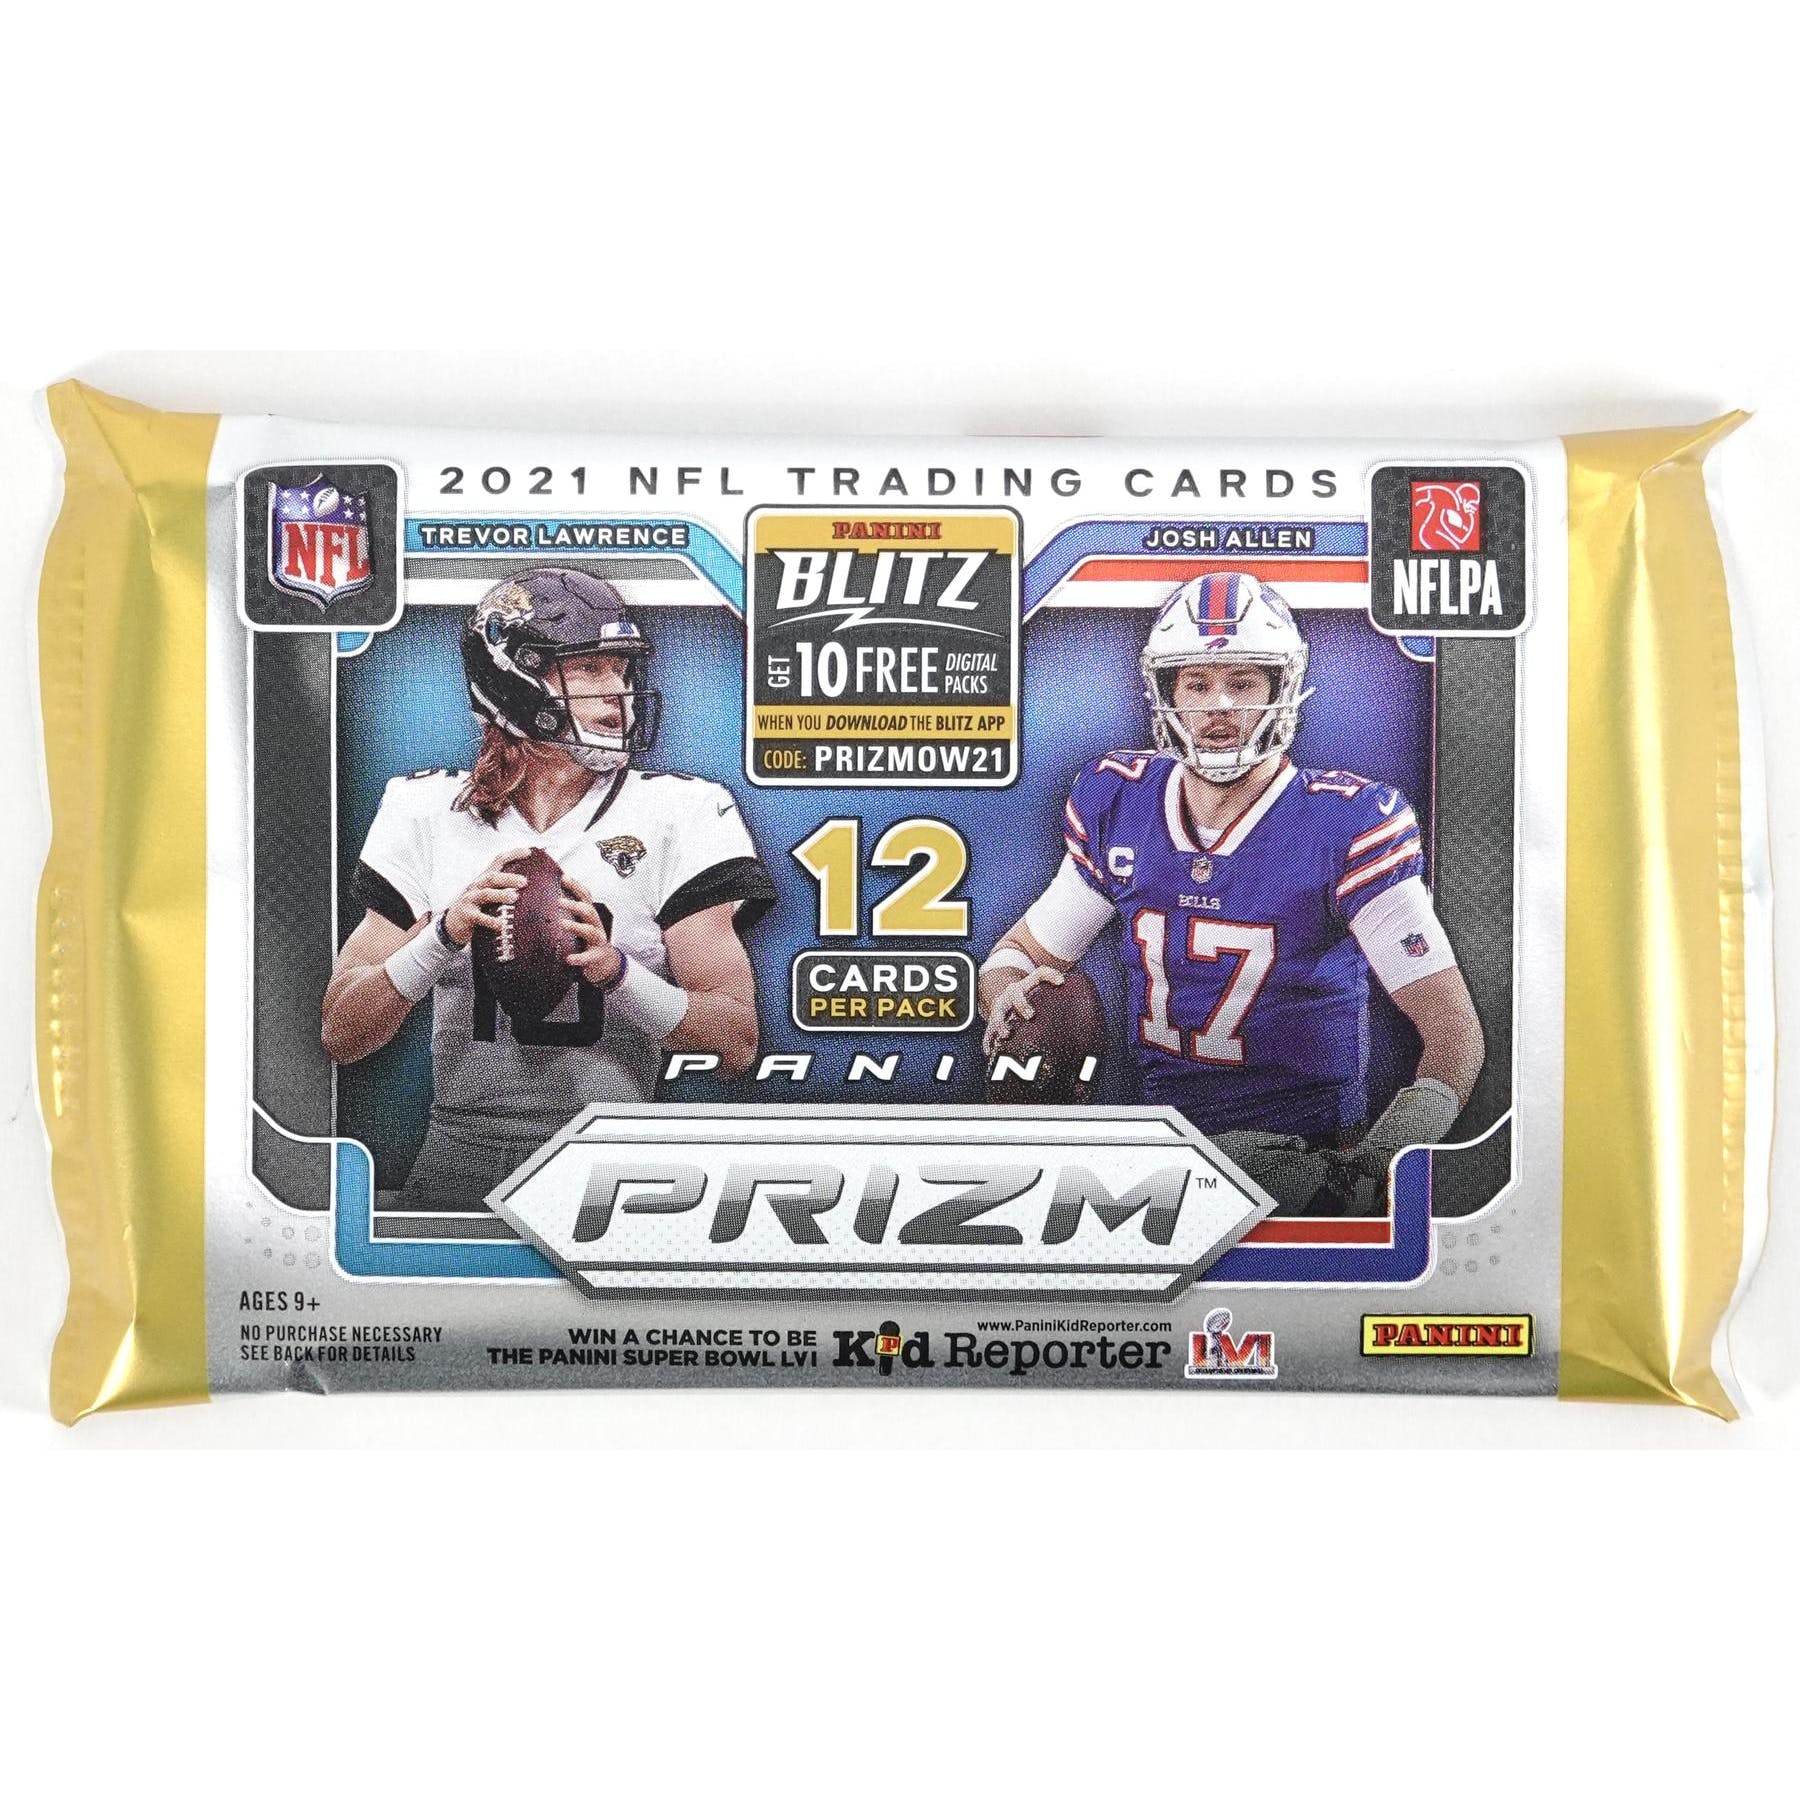 Hump Day Breaks and Personals - 2021 Prizm Football Hobby Pack